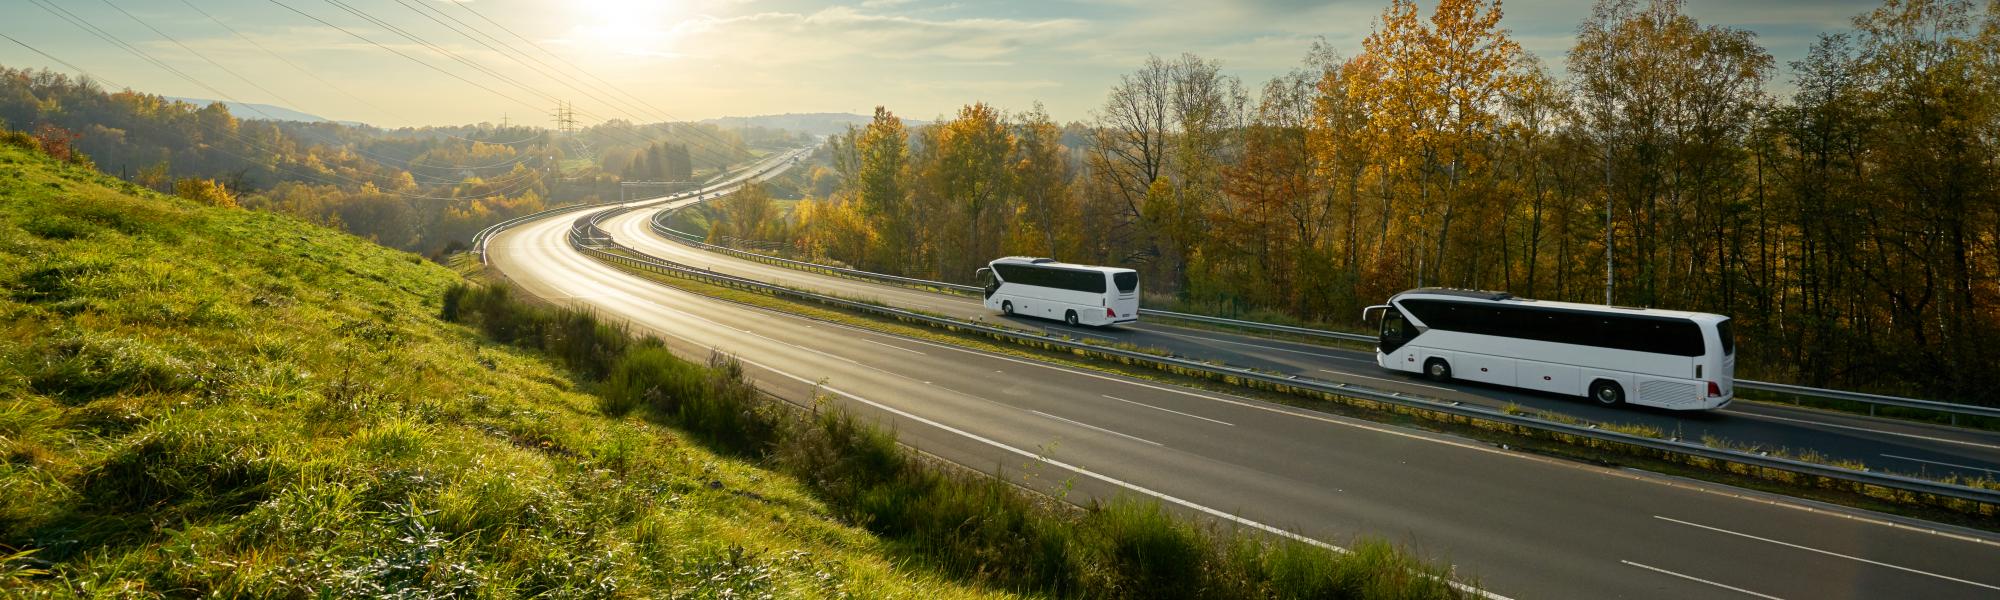 EU Mobility Strategy will severely limit decarbonisation potential of commercial road transport and destroy coach services